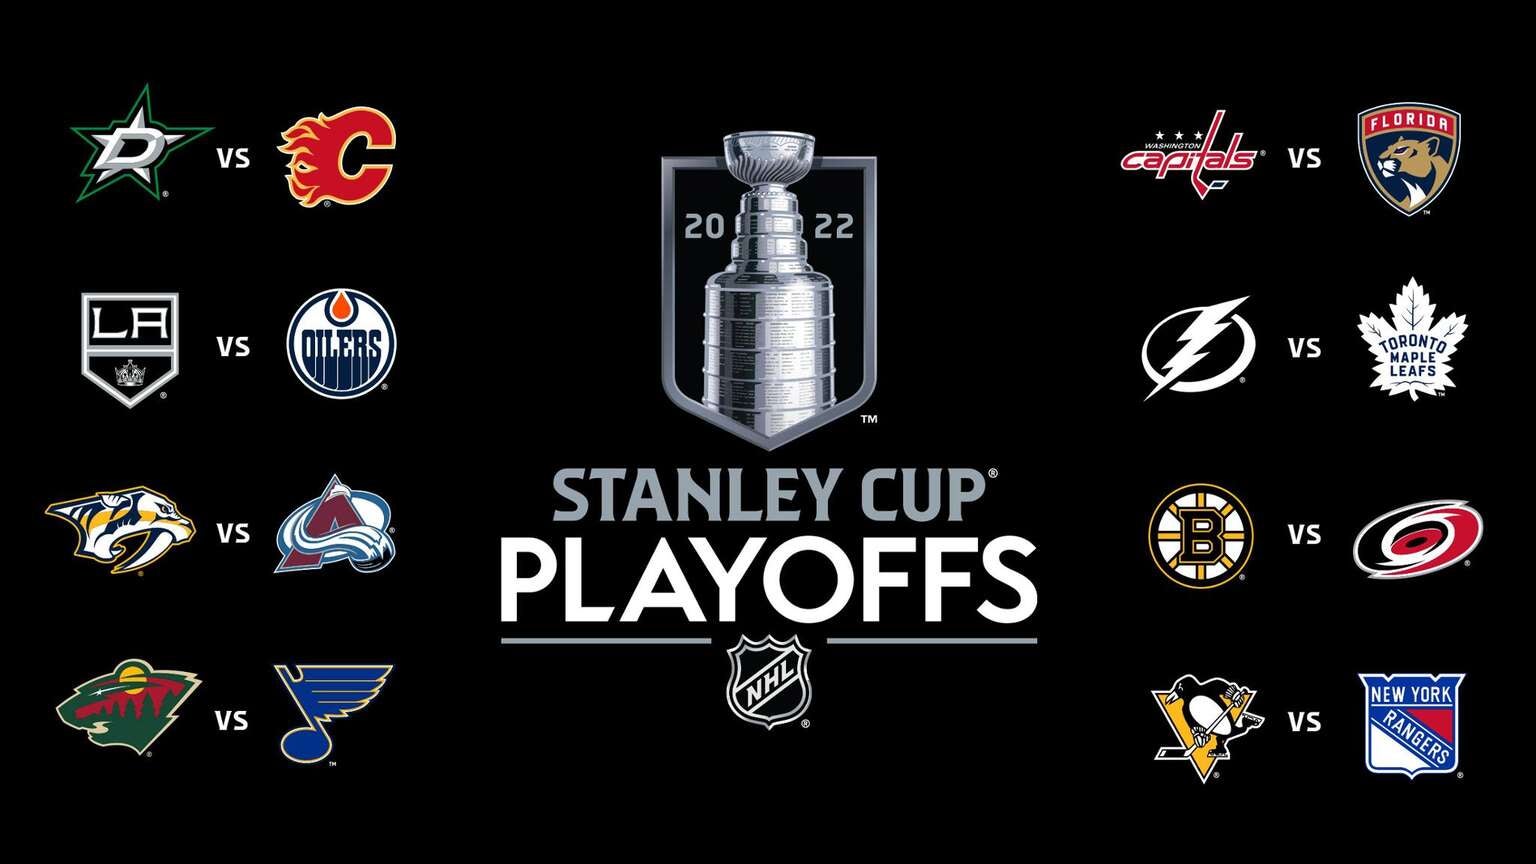 NHL Releases 2022 Stanley Cup Playoff TV Schedule The Streamable (DE)